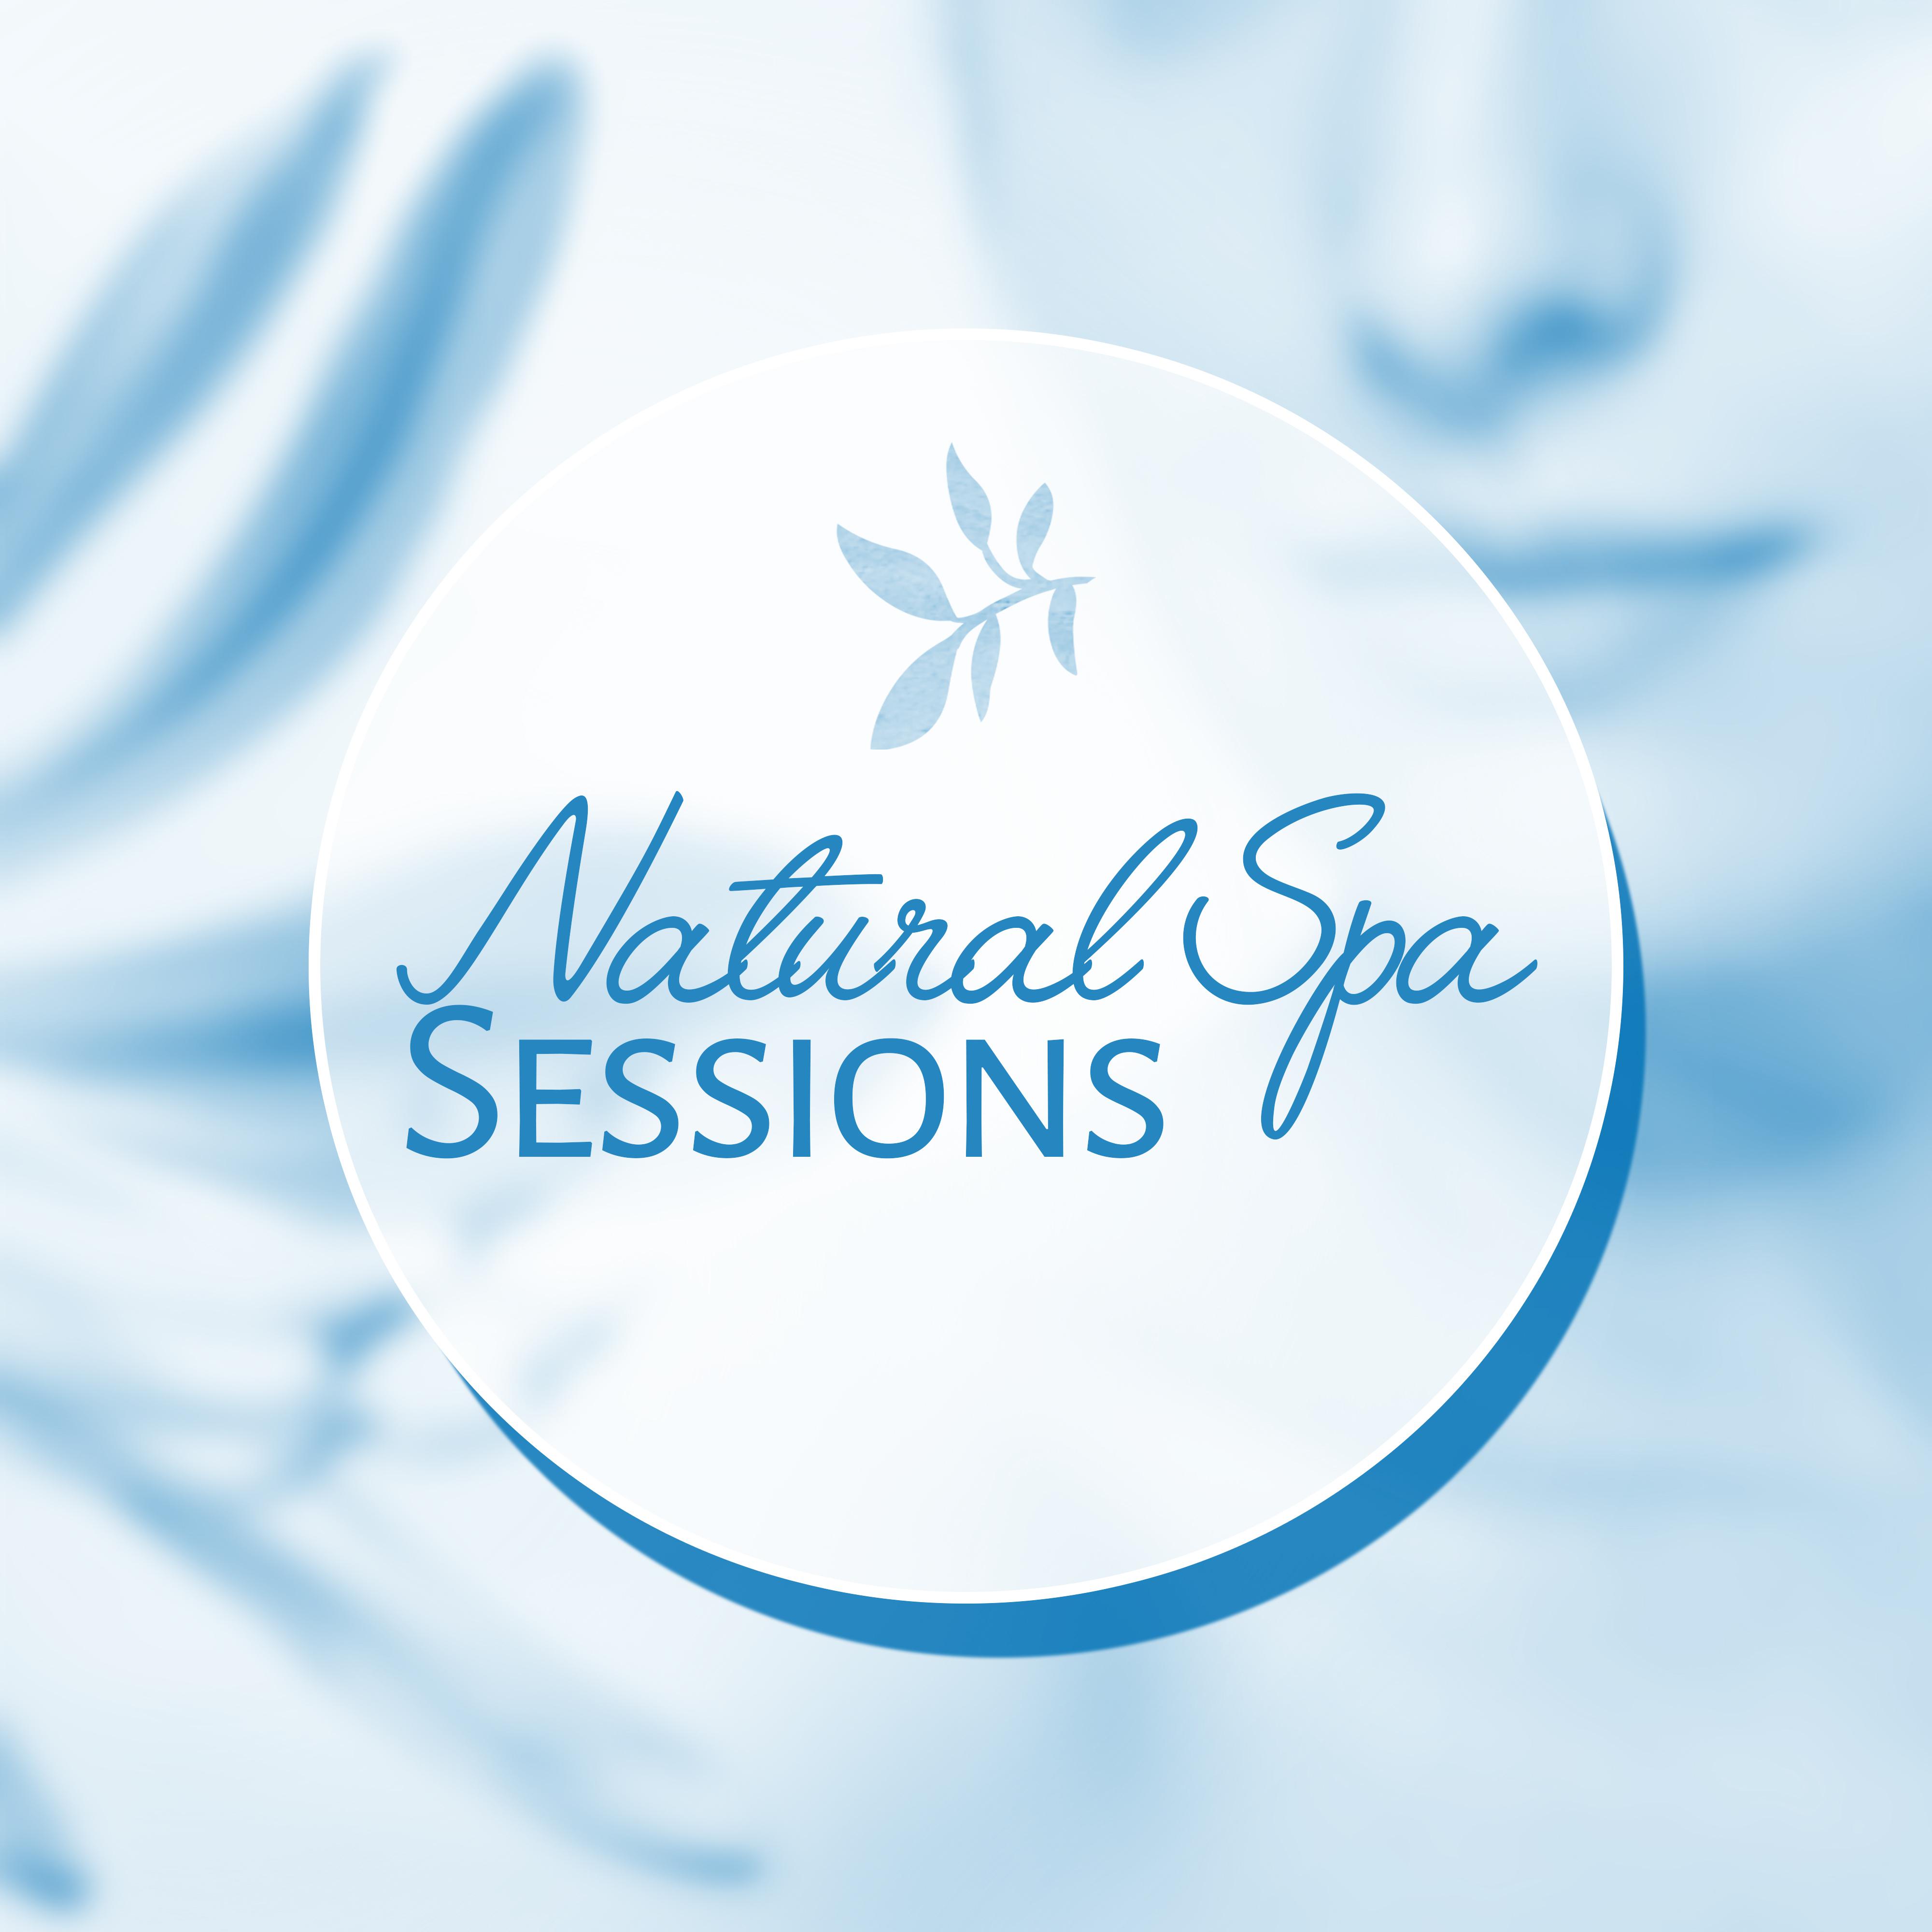 Natural Spa Sessions  Pure Spa, Anti Stress Music, Soothing Rain, Singing Birds, Calming Melodies for Wellness, Deep Massage, Aromatherapy